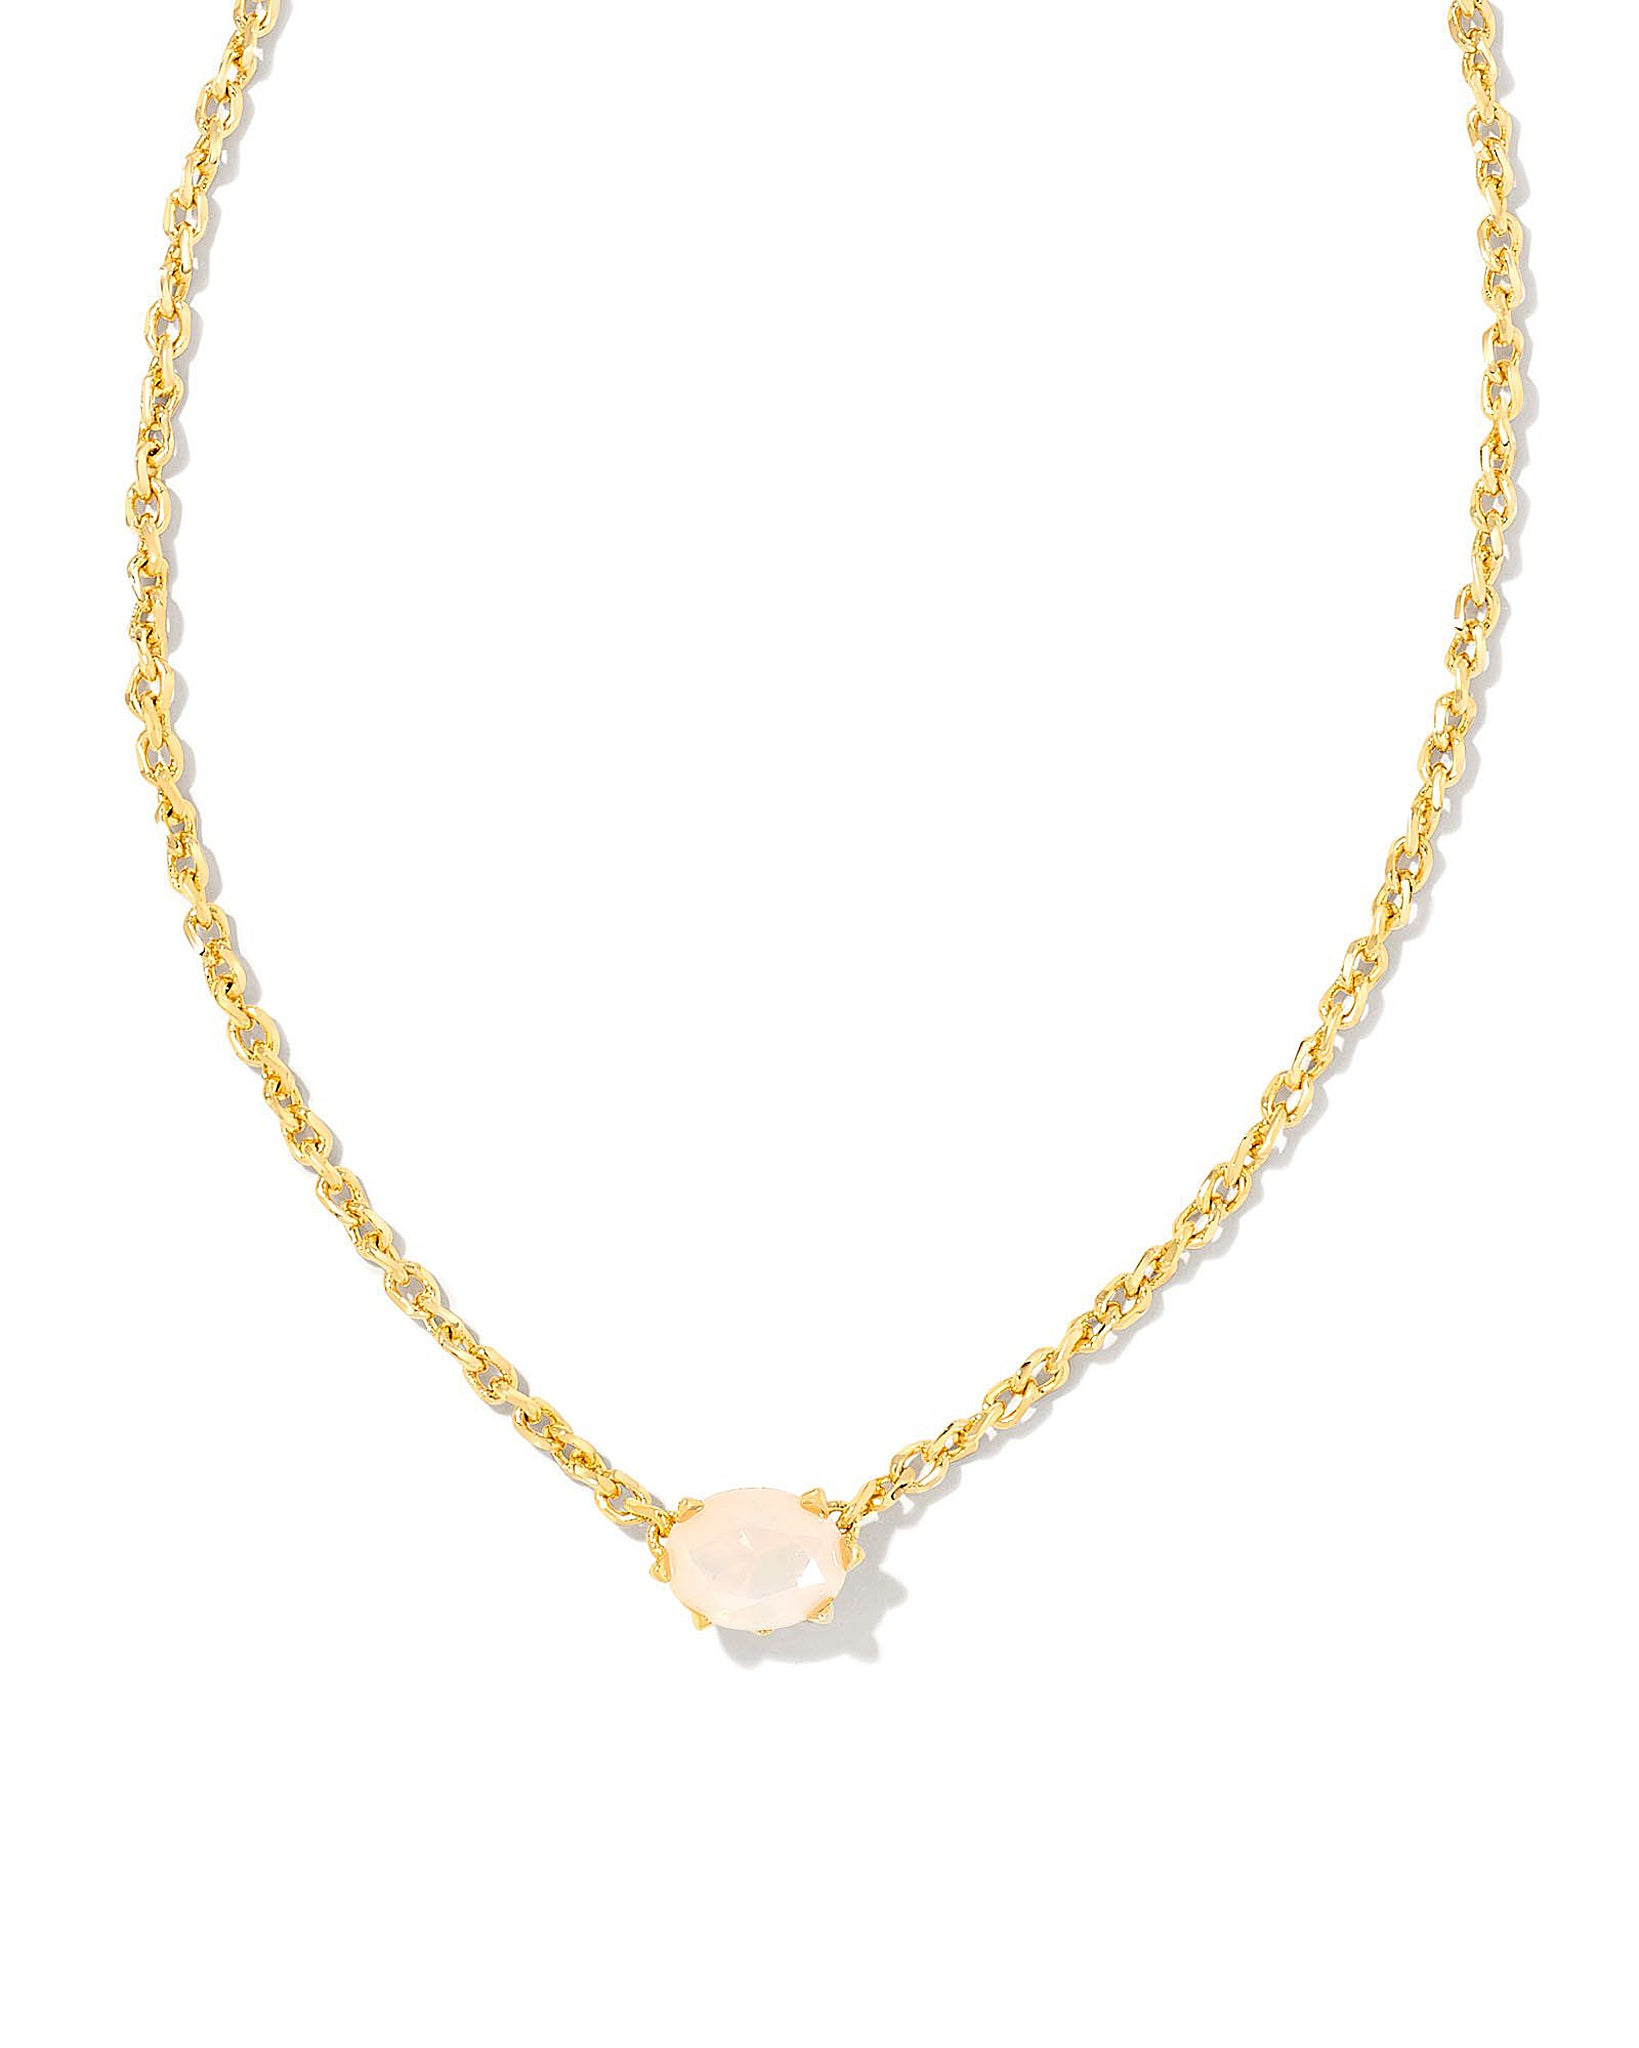 Kendra Scott Cailin Oval Pendant Necklace in Champagne Opal Crystal and Gold